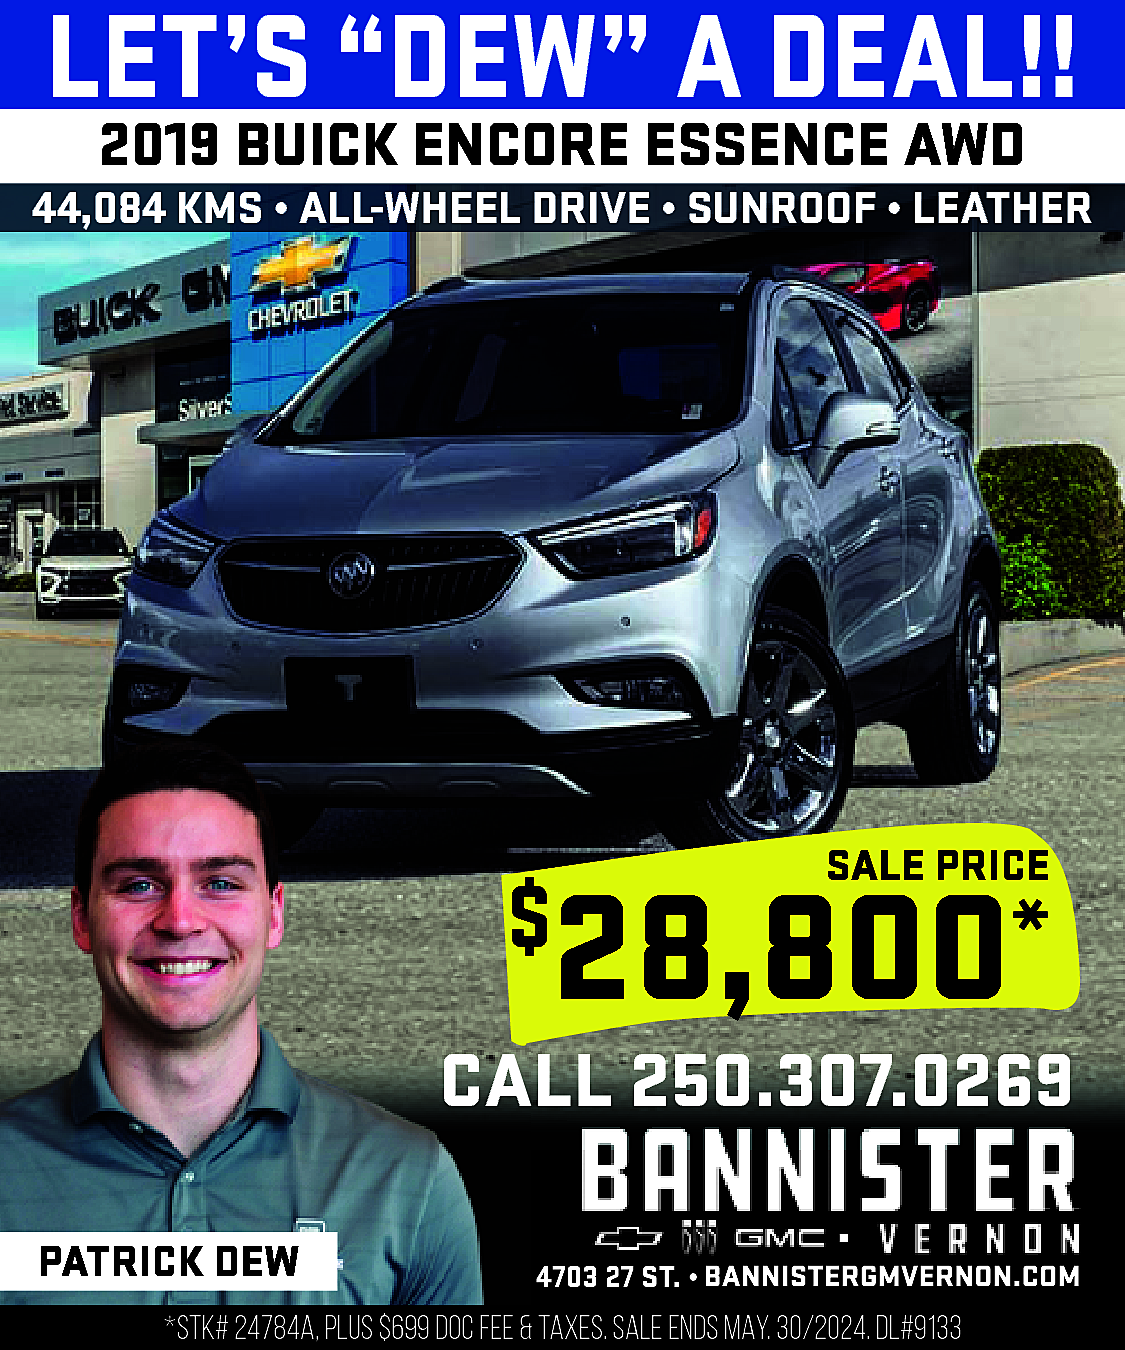 LET’S “DEW” A DEAL!! <br>2019  LET’S “DEW” A DEAL!!  2019 BUICK ENCORE ESSENCE AWD    44,084 KMS • ALL-WHEEL DRIVE • SUNROOF • LEATHER    SALE PRICE    28,800*    $    CALL 250.307.0269  PATRICK DEW    4703 27 ST. • https://www.bannistergmvernon.com/    *STK# 24784A, PLUS $699 DOC FEE & TAXES. SALE ENDS MAY. 30/2024. DL#9133    